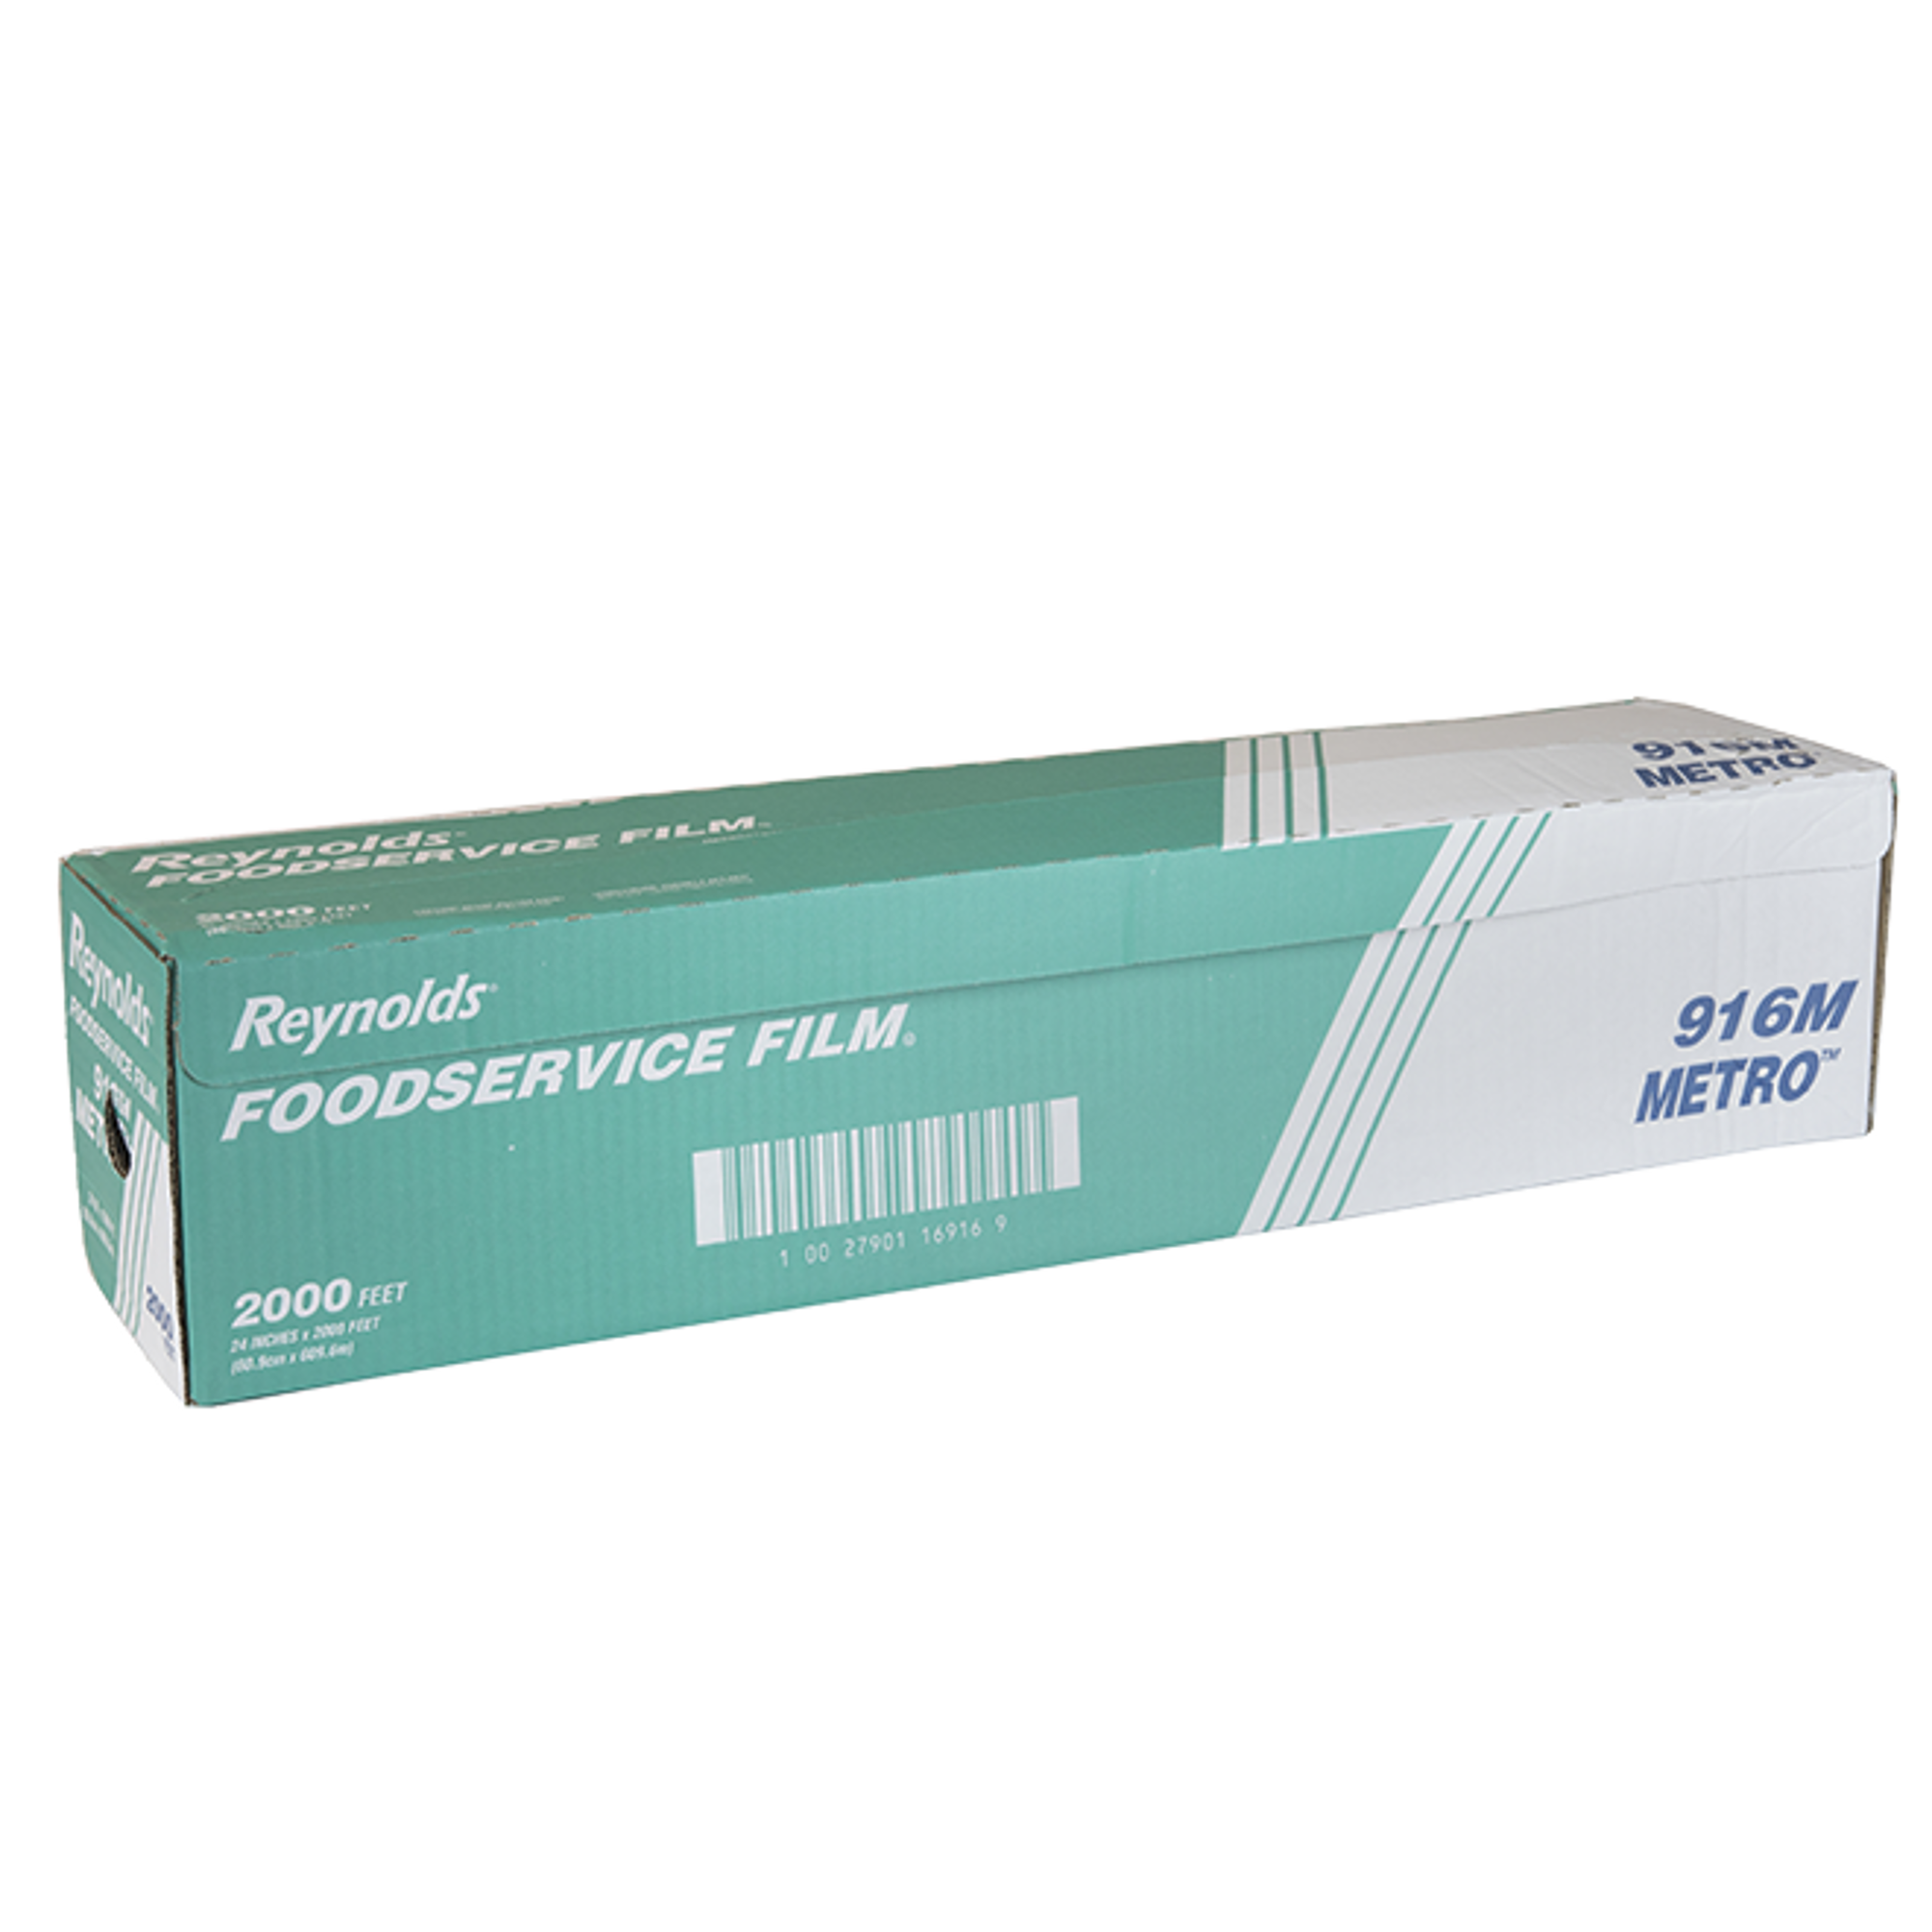 Rouleau film protection tout usage type 151, 56 x 3 m